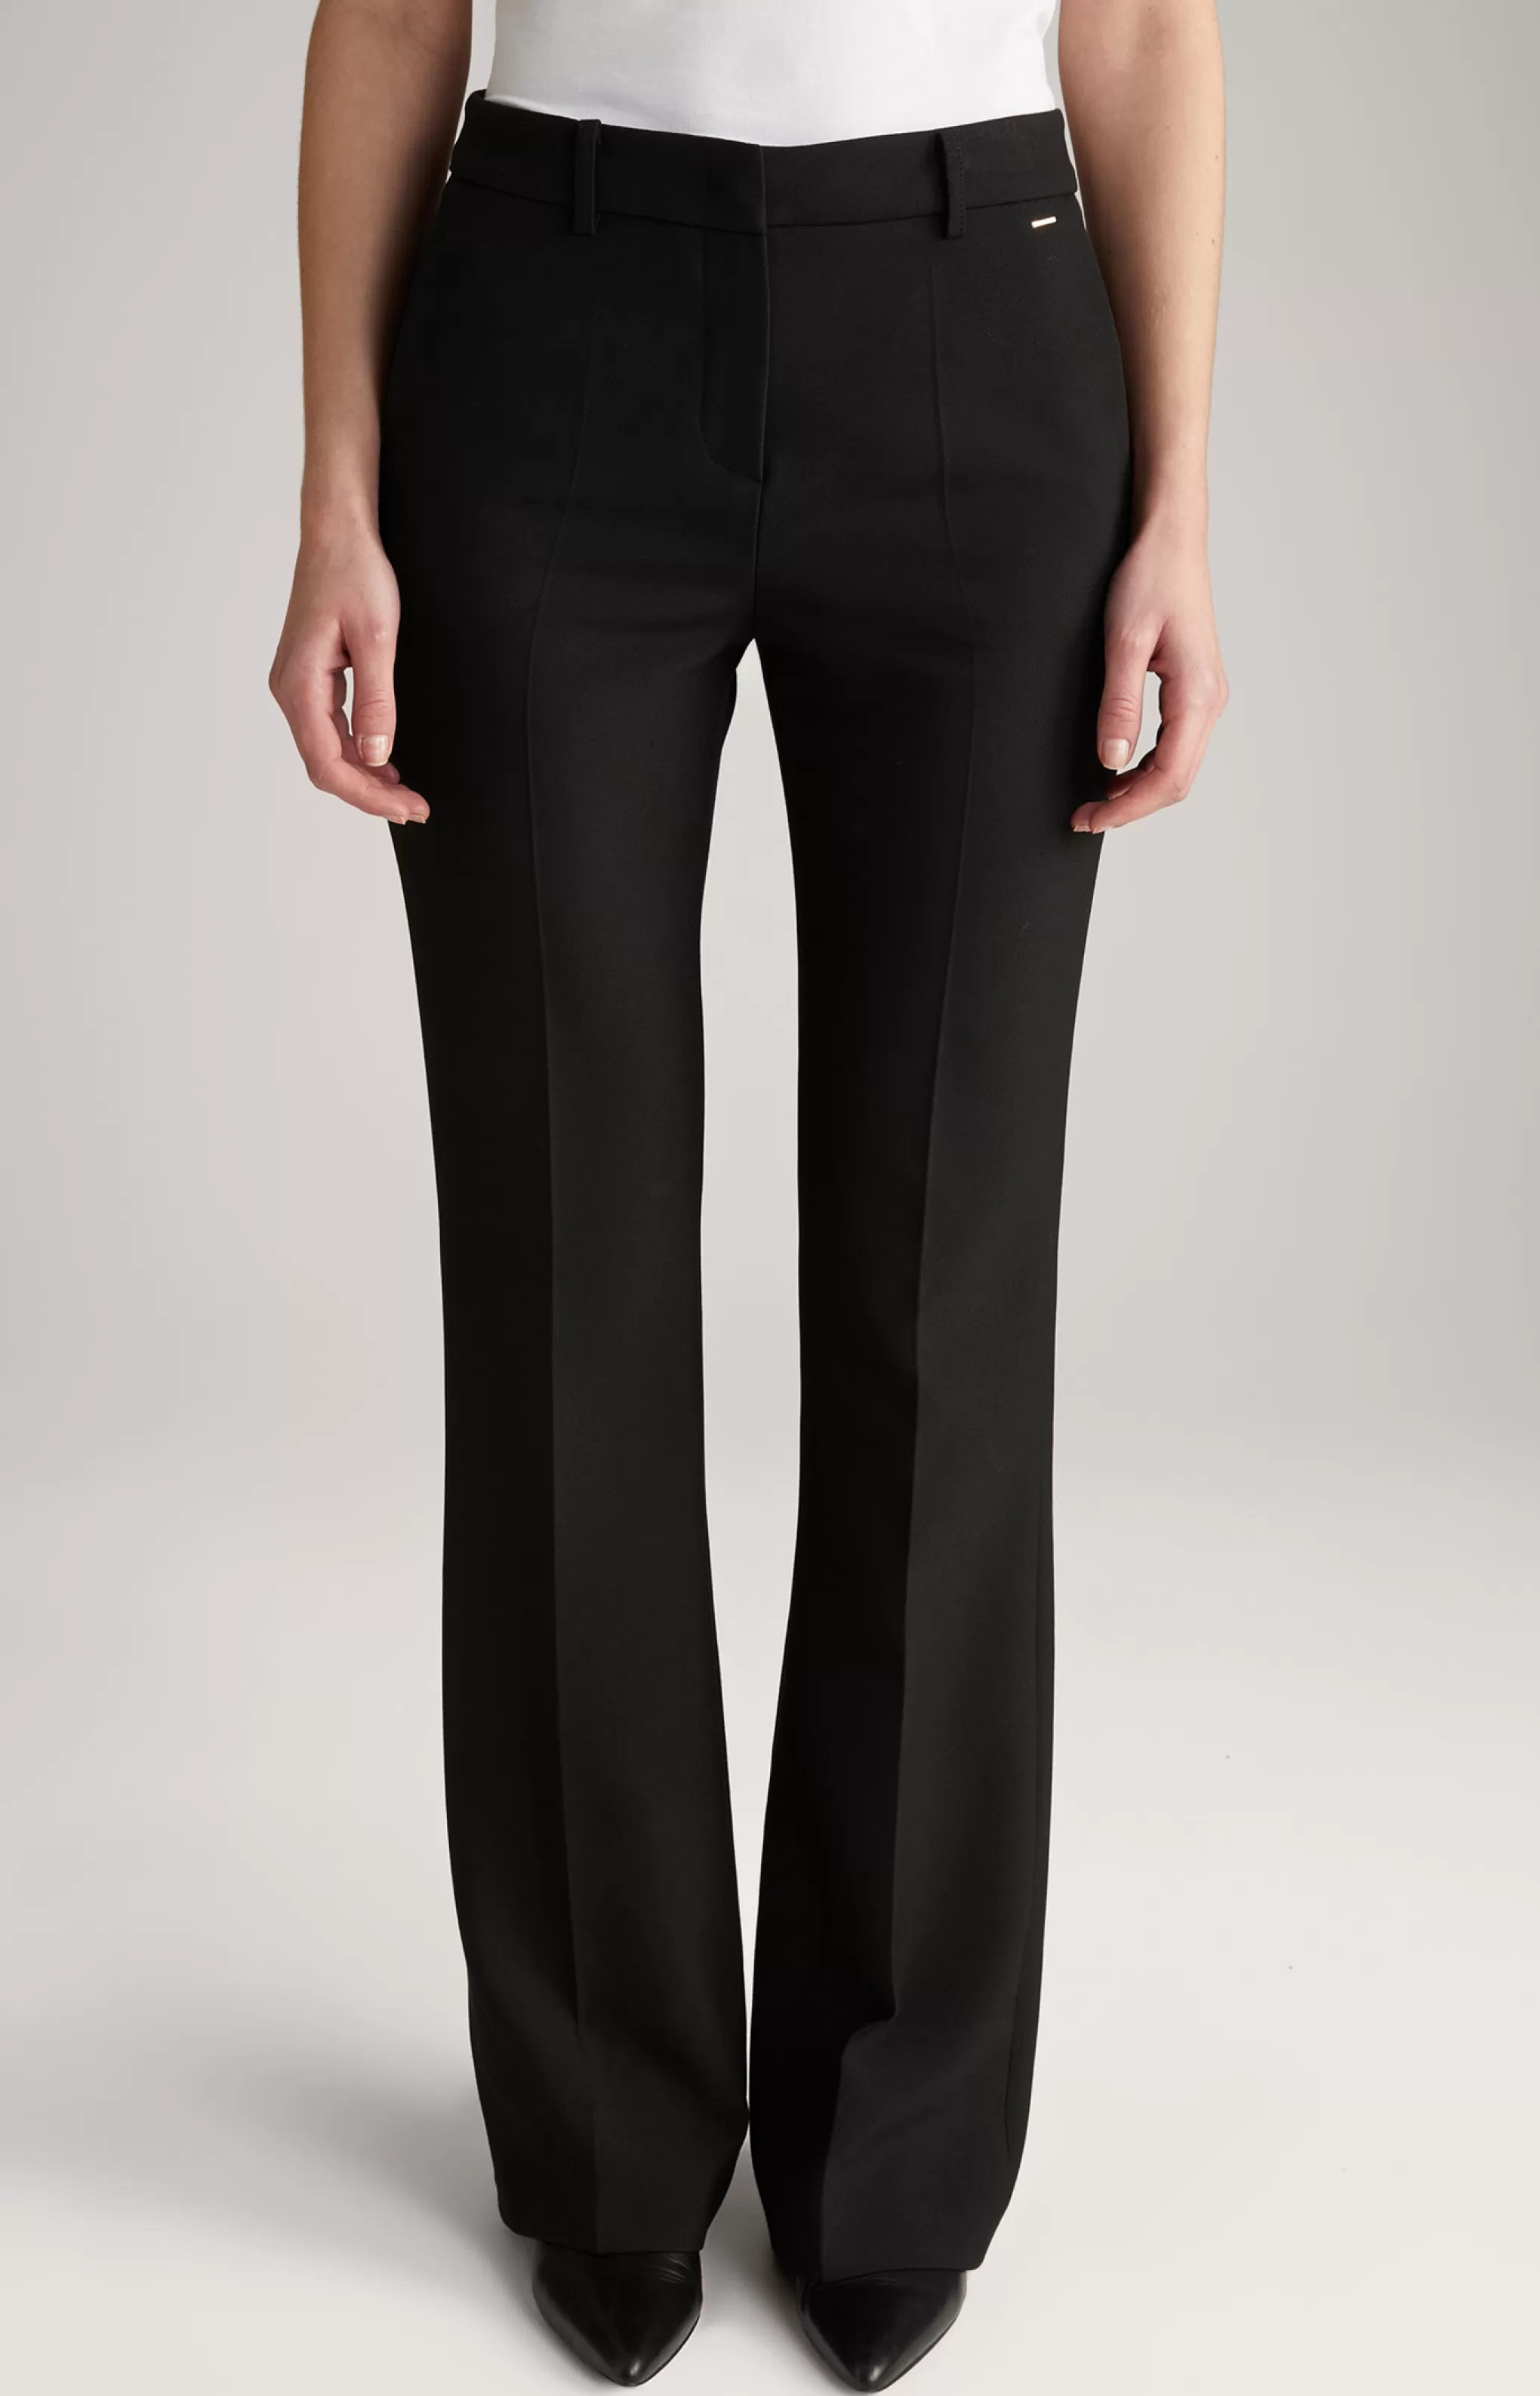 Trousers | Clothing*JOOP Trousers | Clothing Marlene Trousers in